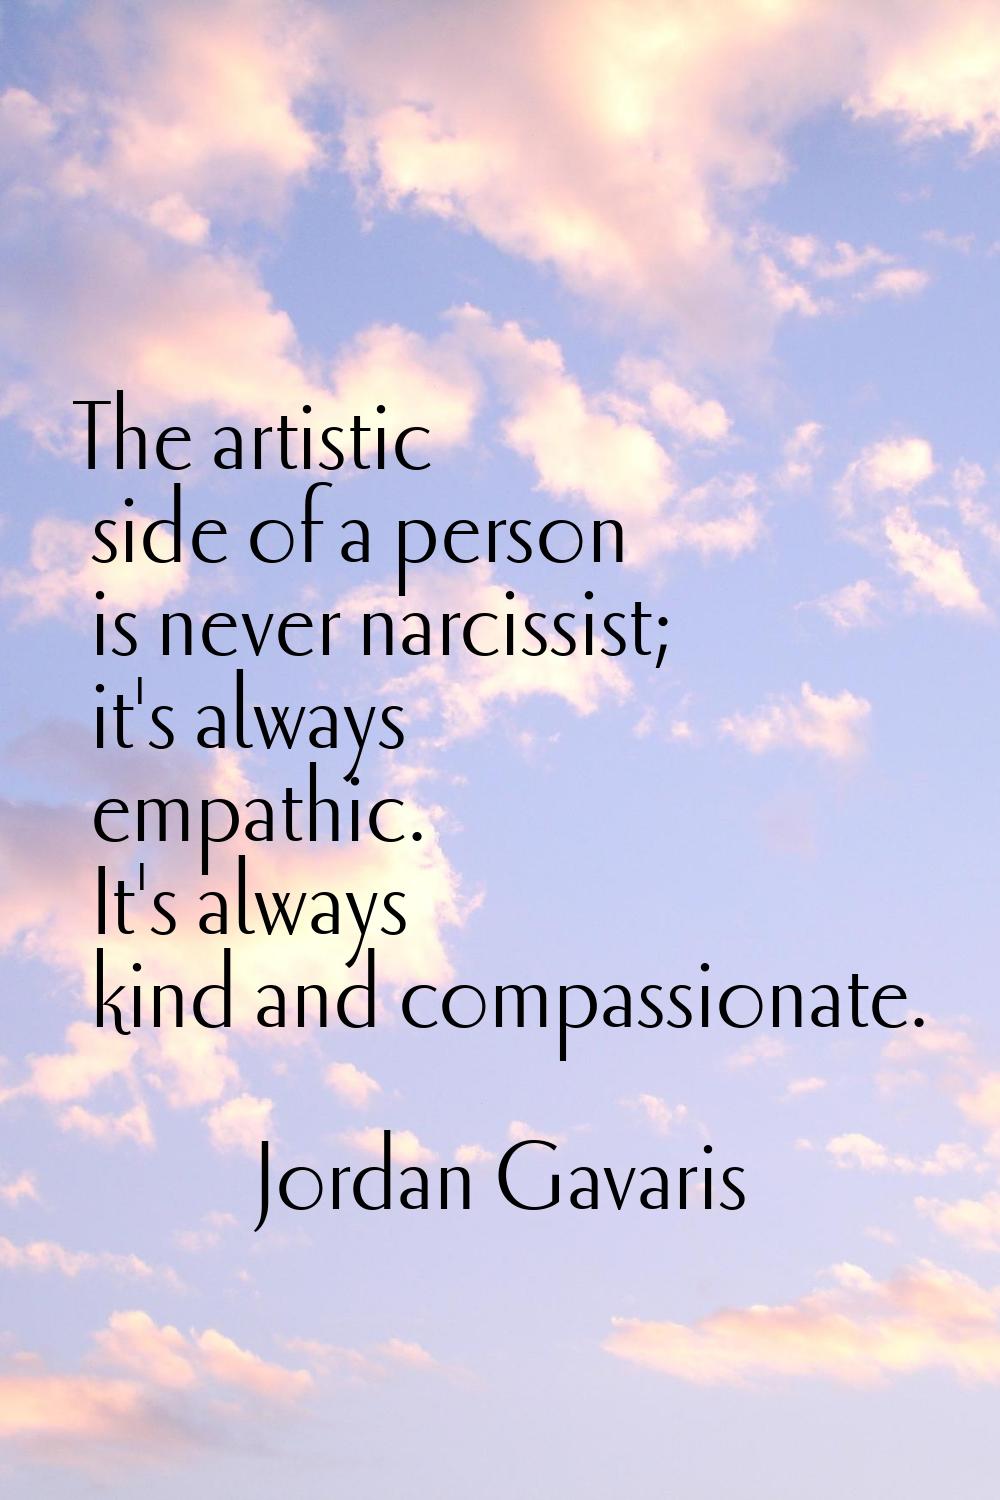 The artistic side of a person is never narcissist; it's always empathic. It's always kind and compa